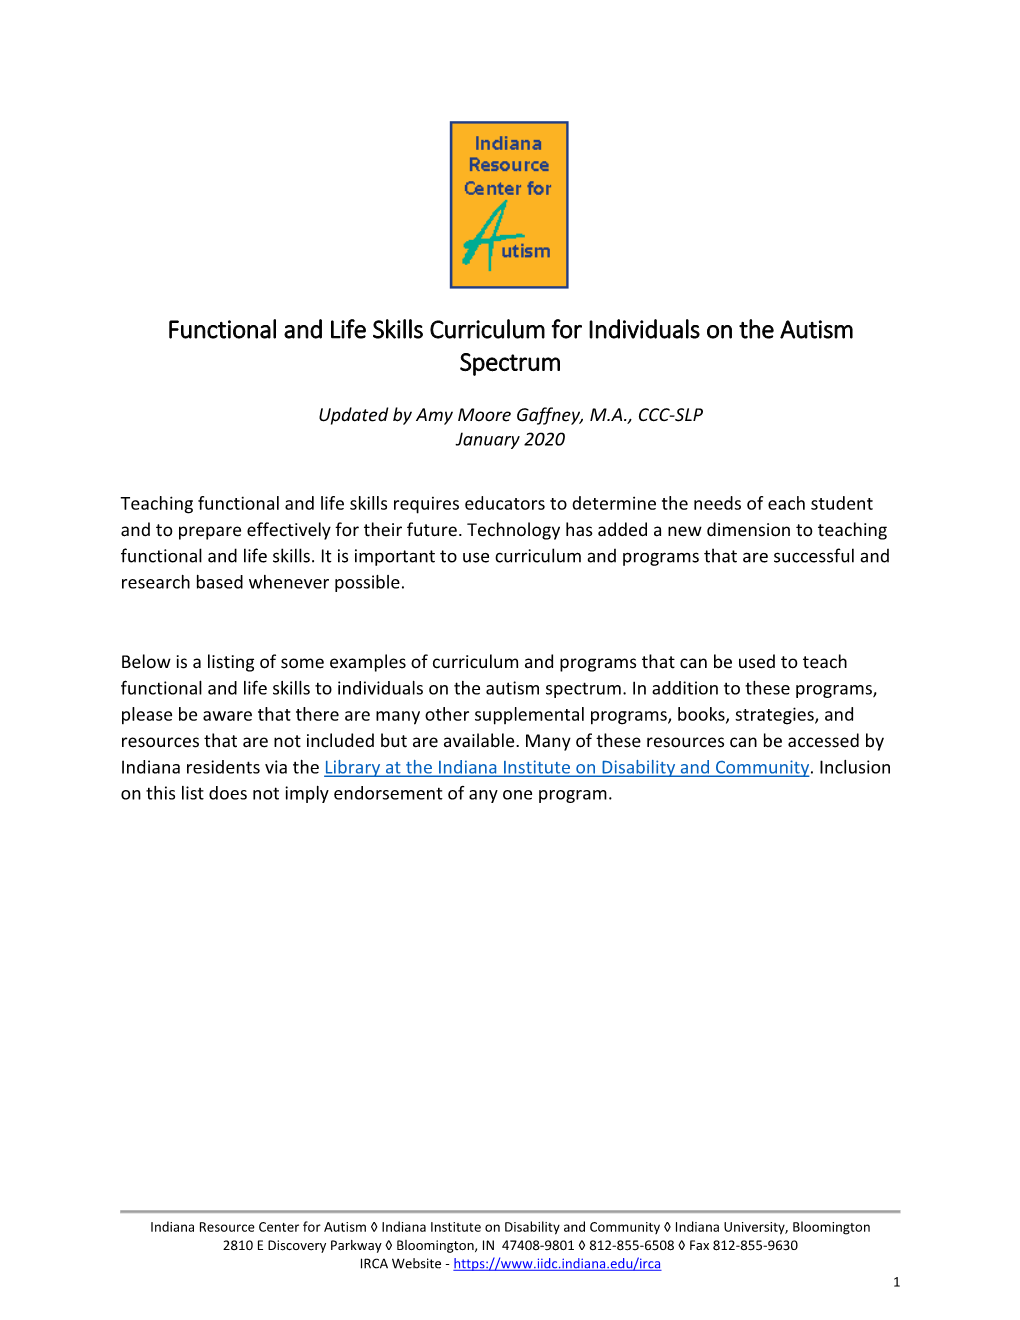 Functional and Life Skills Curriculum for Individuals on the Autism Spectrum